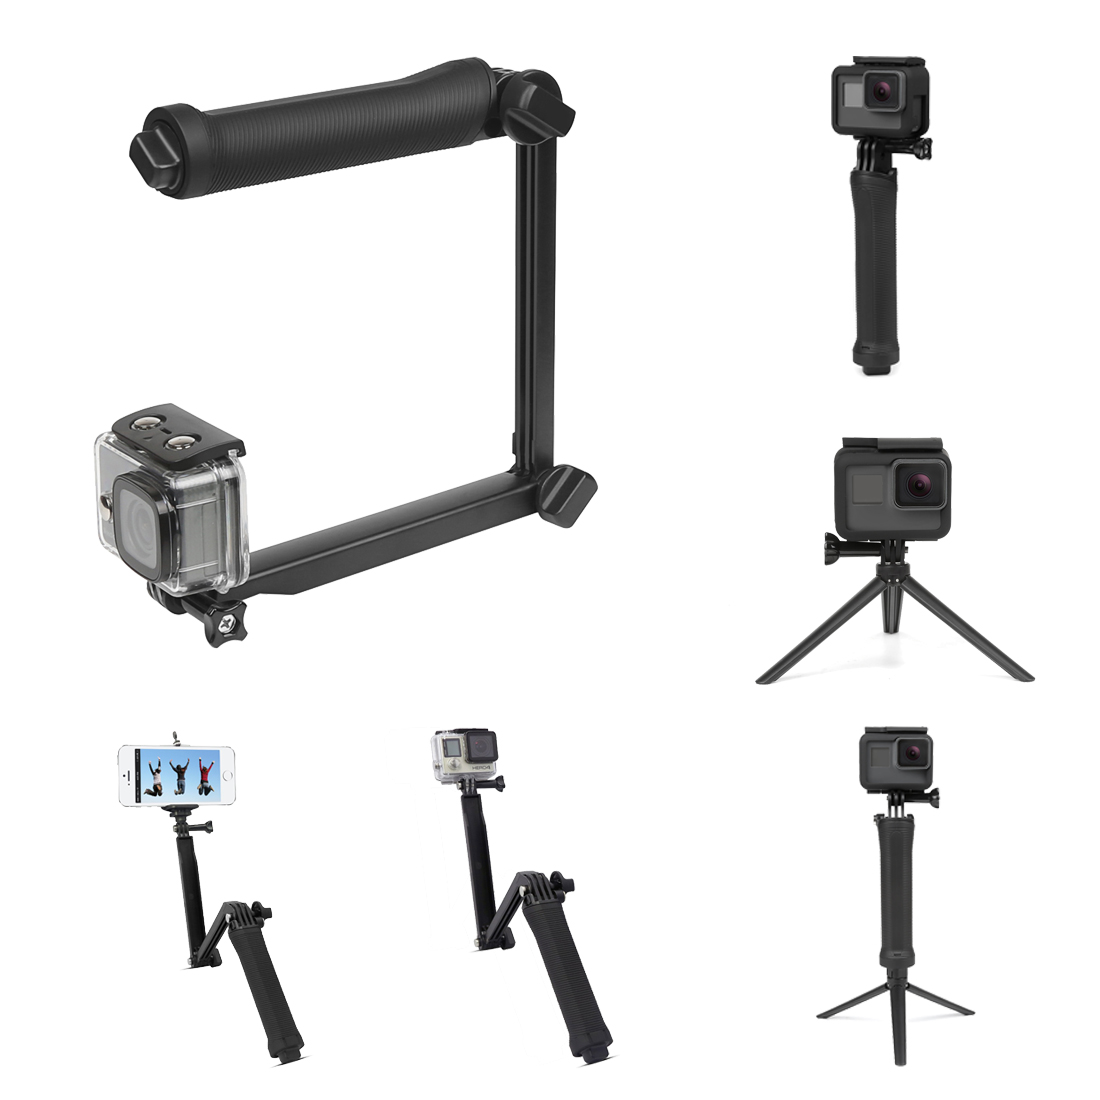 

SHOOT XTGP217 Foldable Multi-functional 3-Way Grip Arm Monopod Stand Mini Tripod Selfie Stick for GoPro SJCAM Eken Xiaomi Action Cameras for Smartphones for iPhone for Samsung